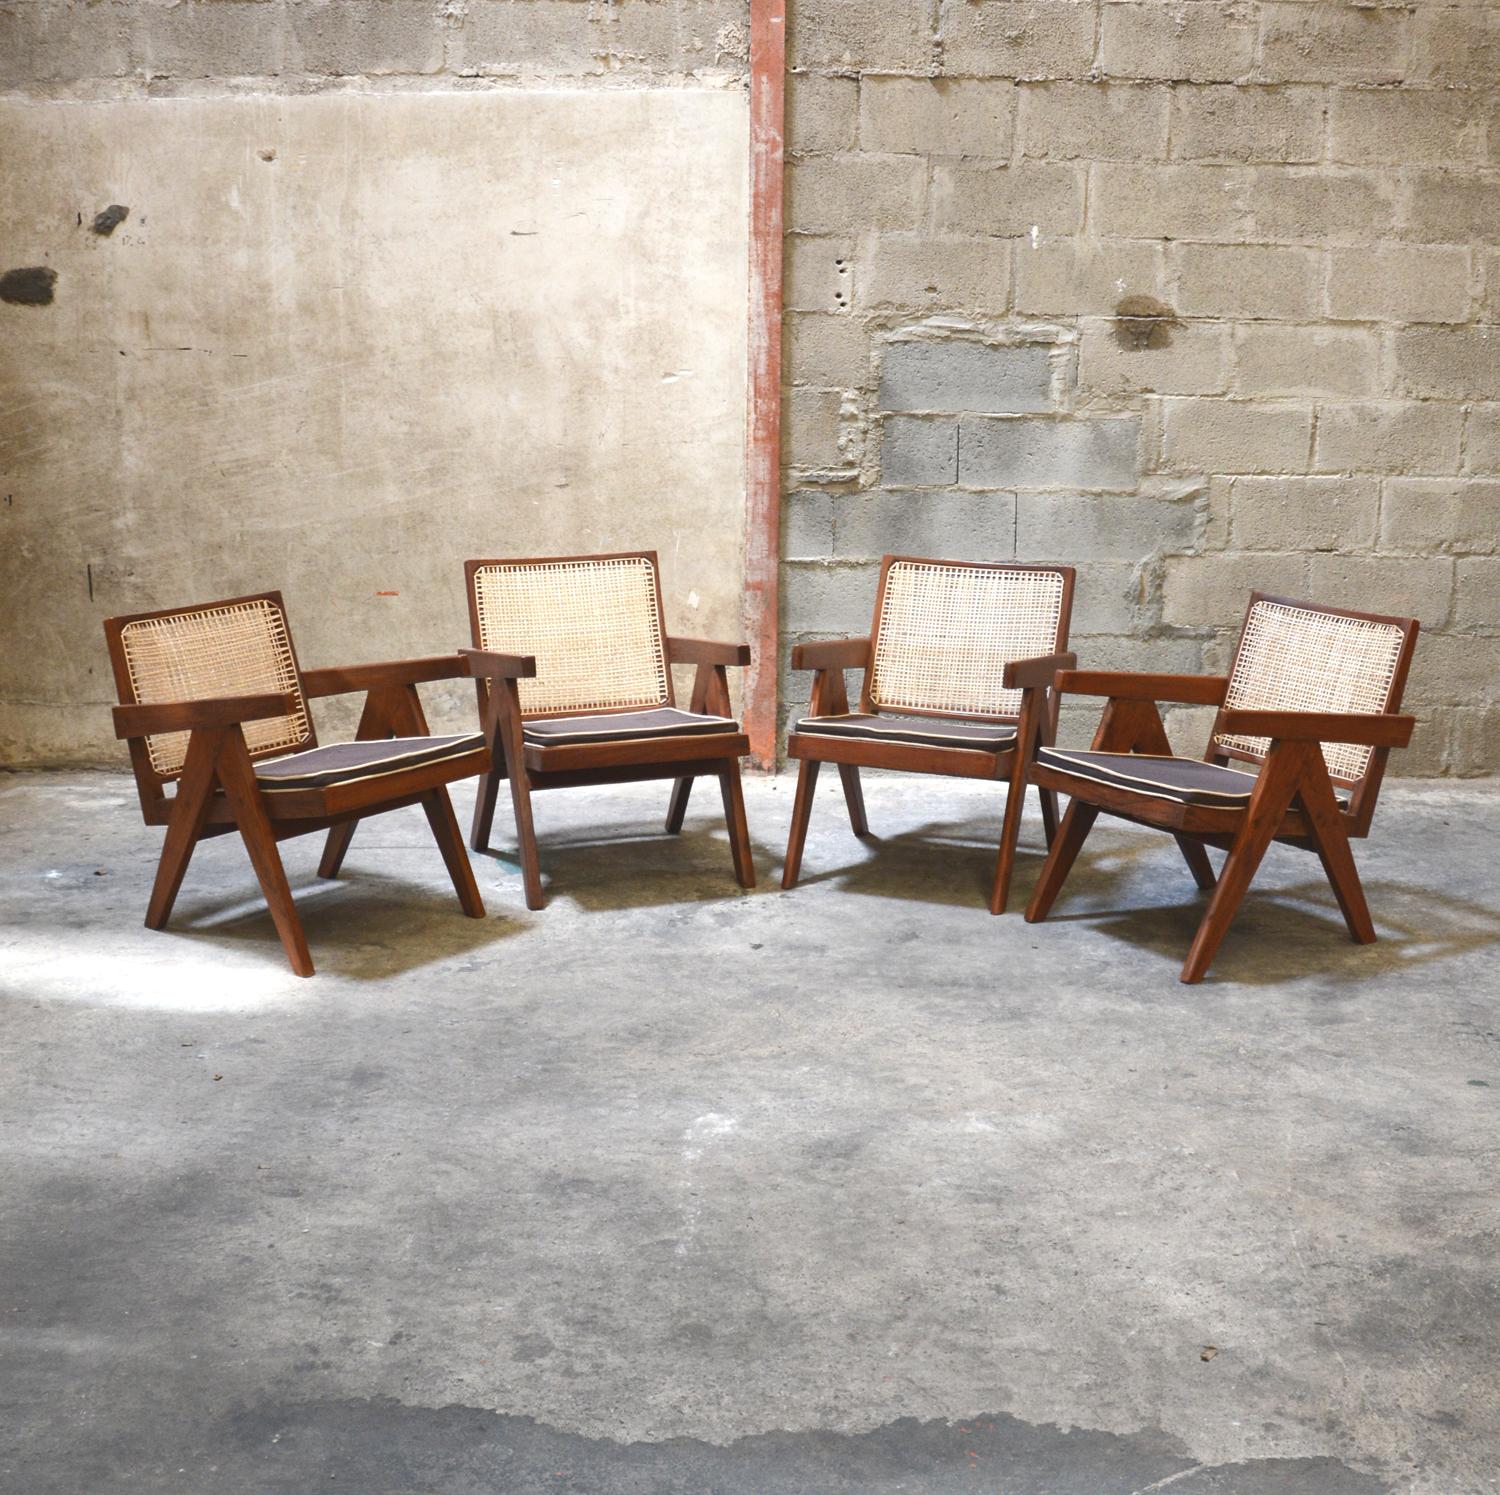 Pierre Jeanneret, exceptional set of 4 'Easy Armchairs' with original Lettering from an Administrative building in Chandigarh, India. 

2 armchairs have their original lettering (see photos). 
I bought these armchairs directly in Chandigarh in